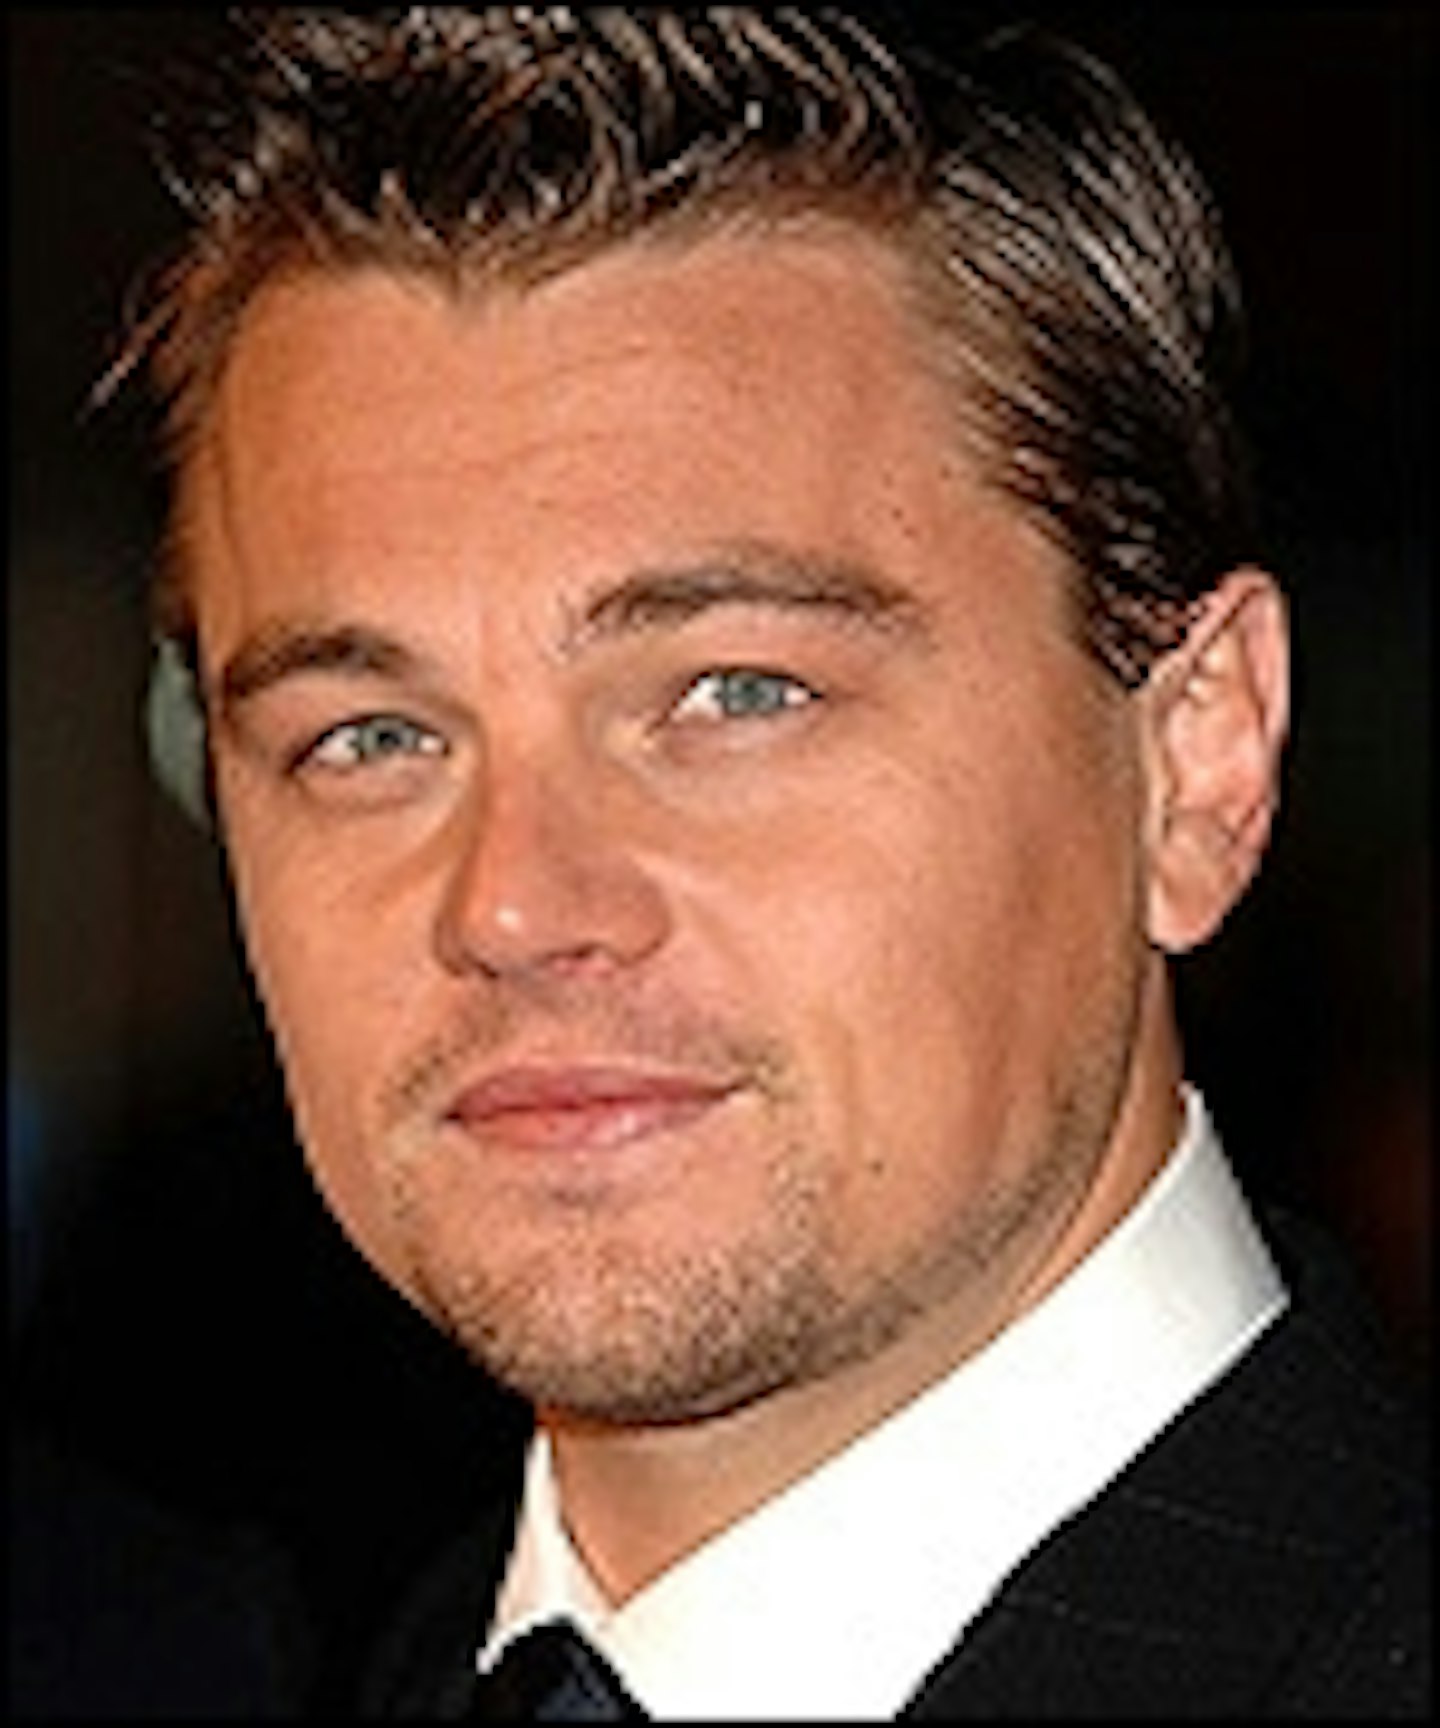 Leo DiCaprio Confirmed For Hoover